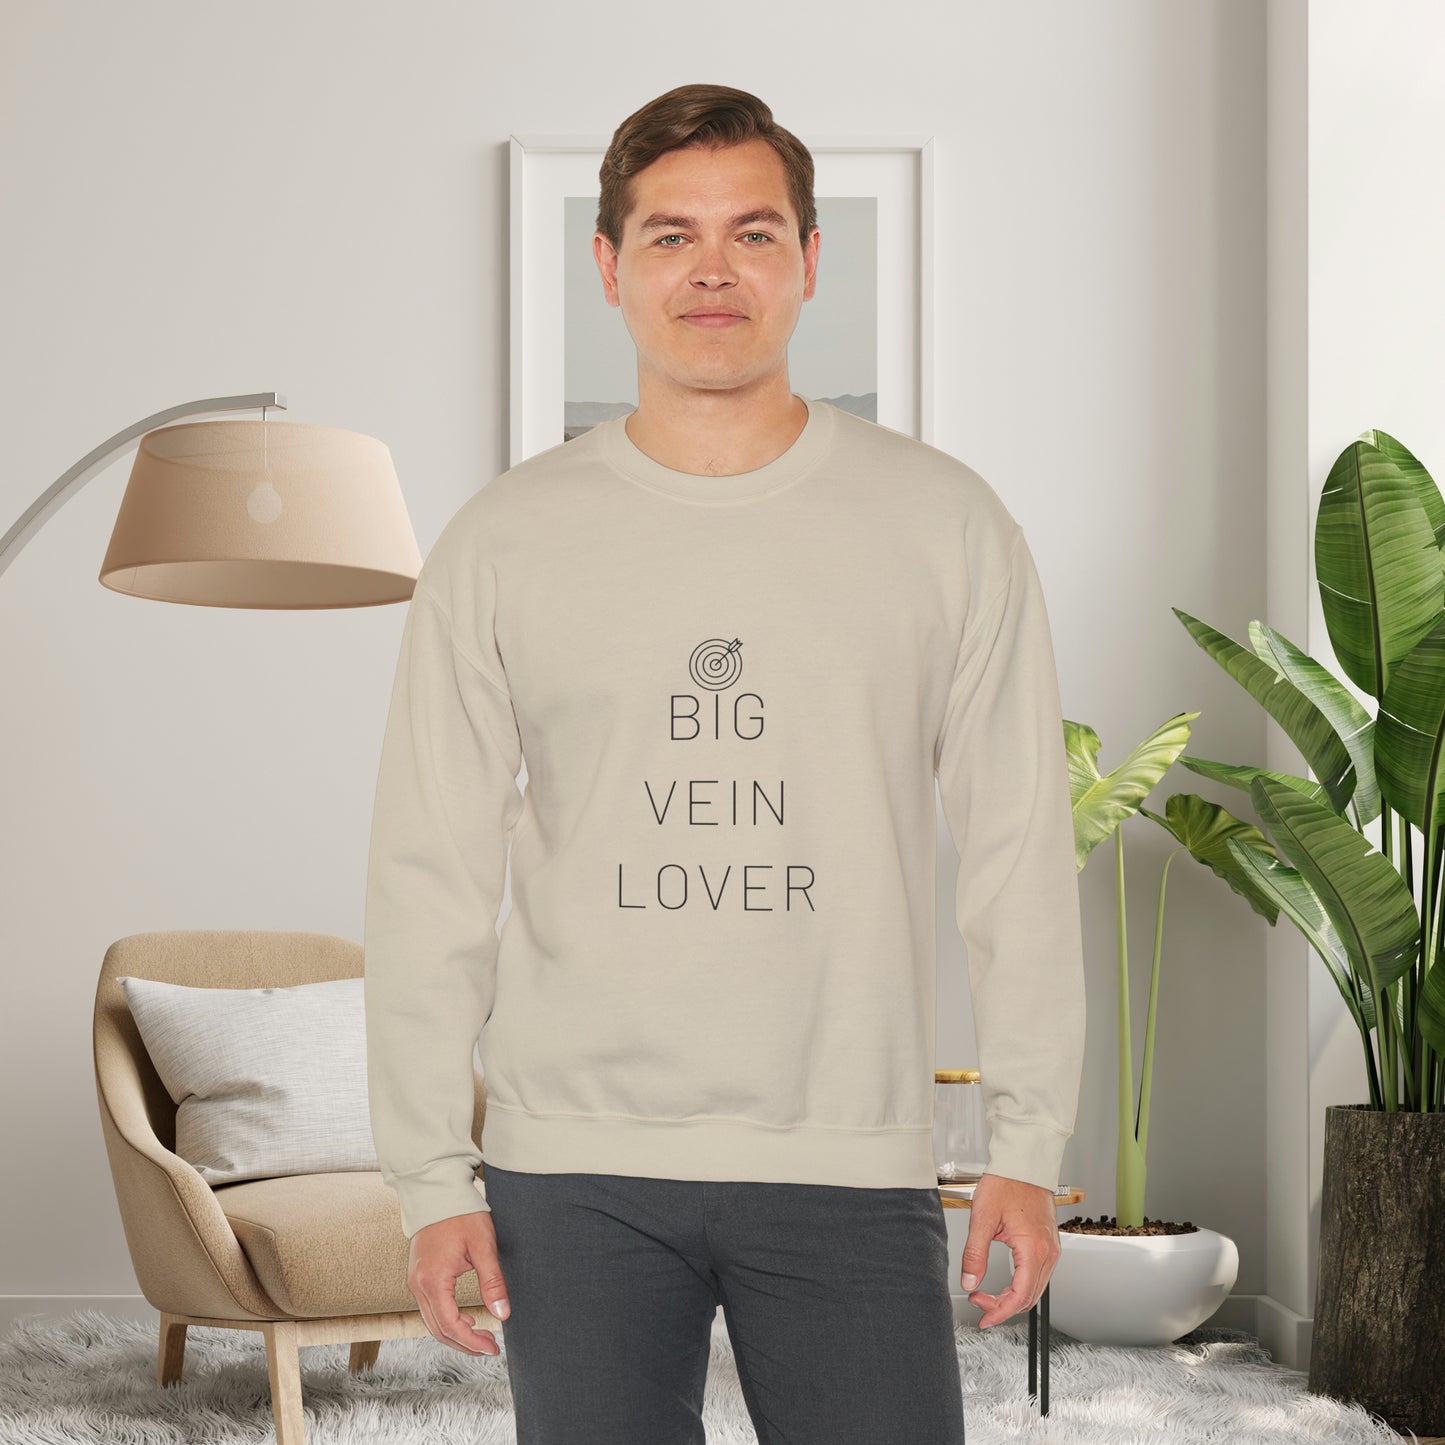 Nurse Angela designed this for cozying up, enjoy this “BIG VEIN LOVER” sweatshirt. Give the gift of this Unisex Heavy Blend™ Crewneck Sweatshirt or get one for yourself.